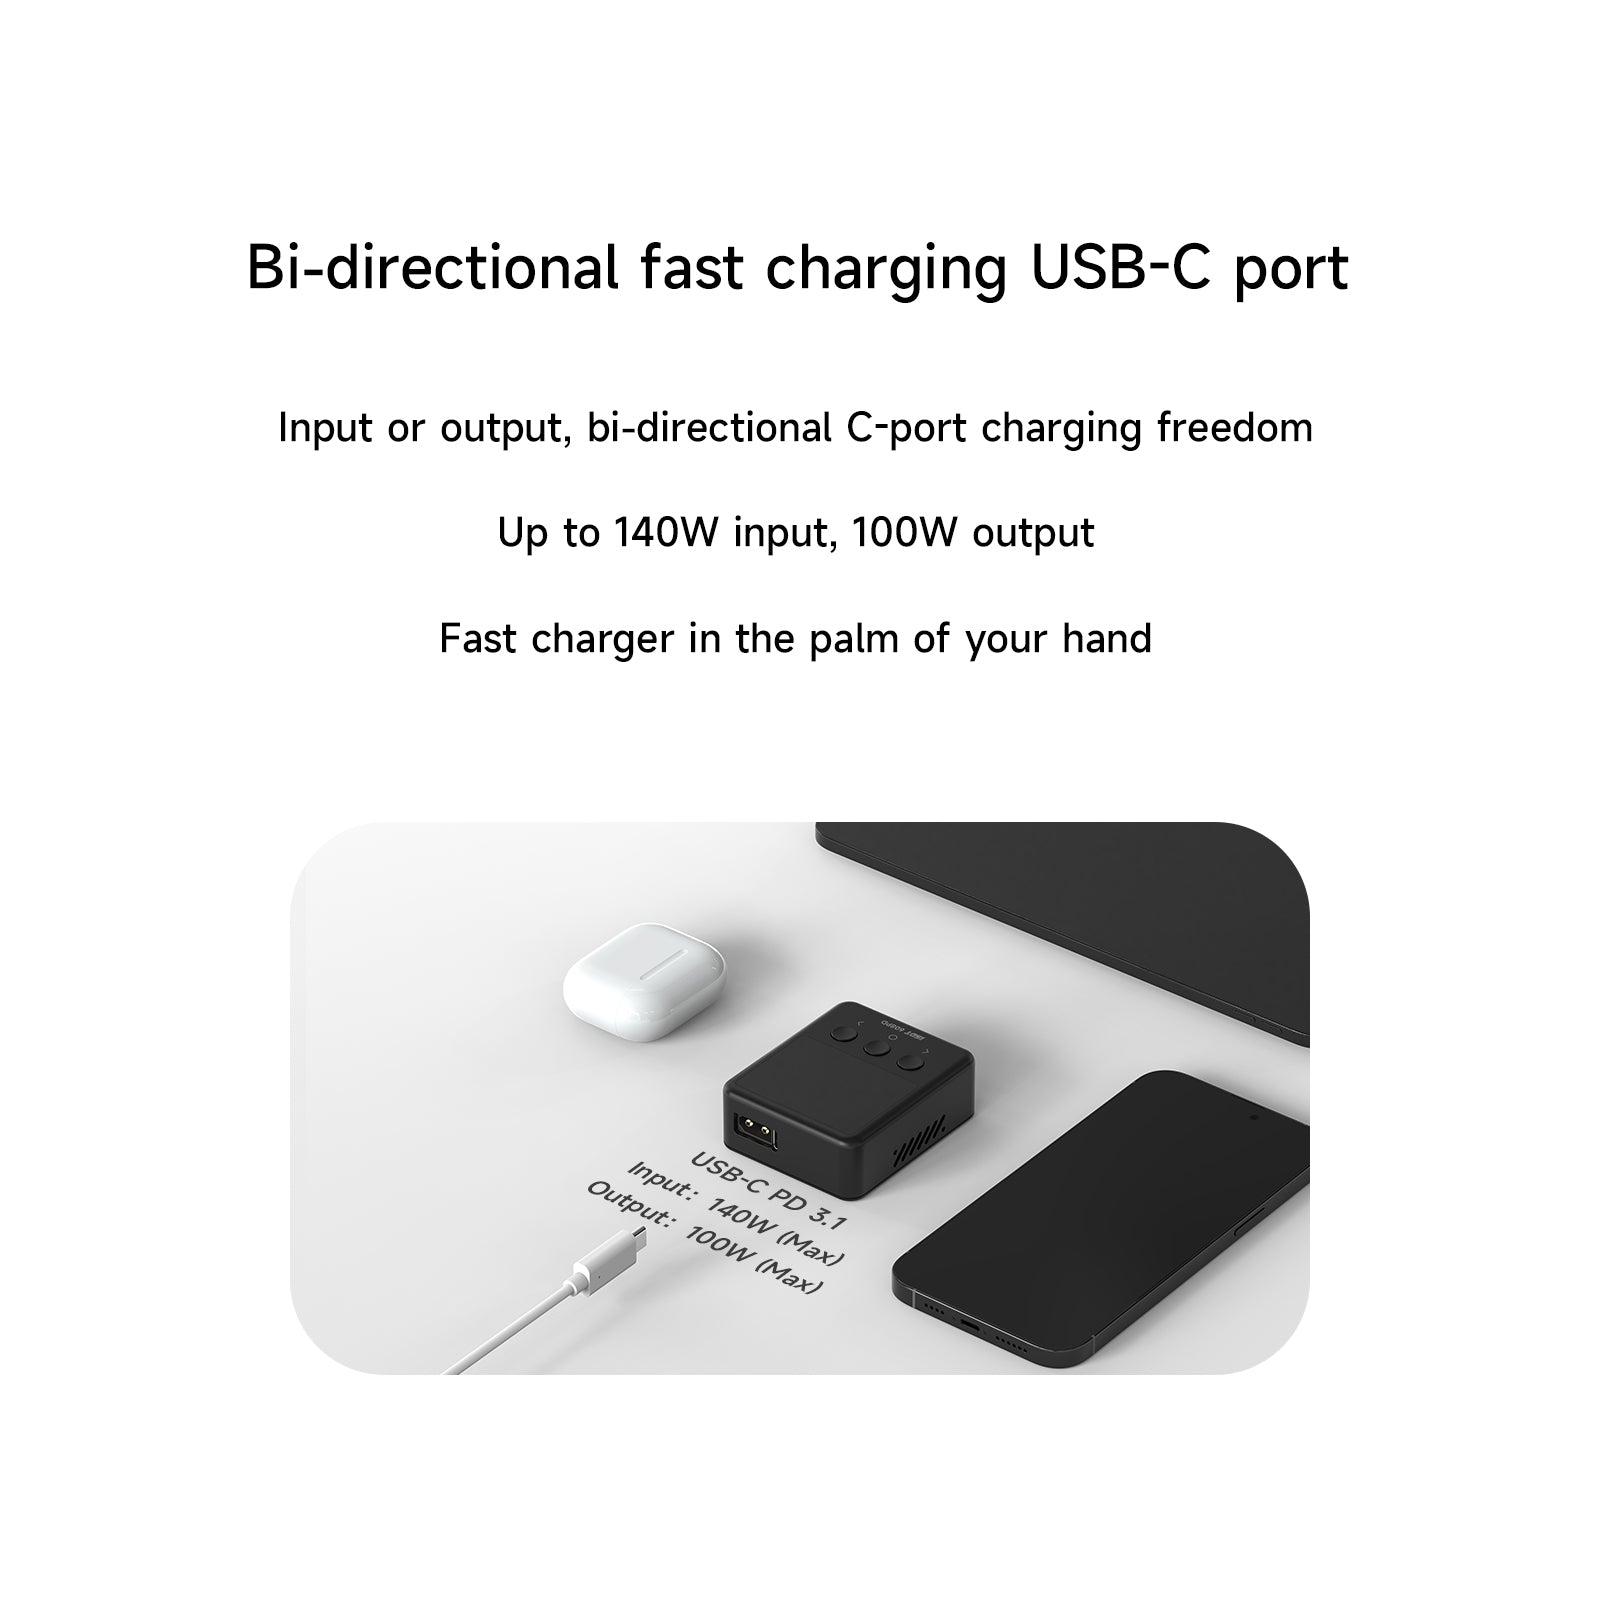 ISDT 608PD Lipo Charger,DC 240W/10A USB C 140W/5A Smart Digital Charger for RC Batteries,Universal Balance Discharge Charger for LiFe/Lilon/LiPo/LiHV (1-6S),NiMH(1-16S),Pb (1-12S) Batteries ISDT